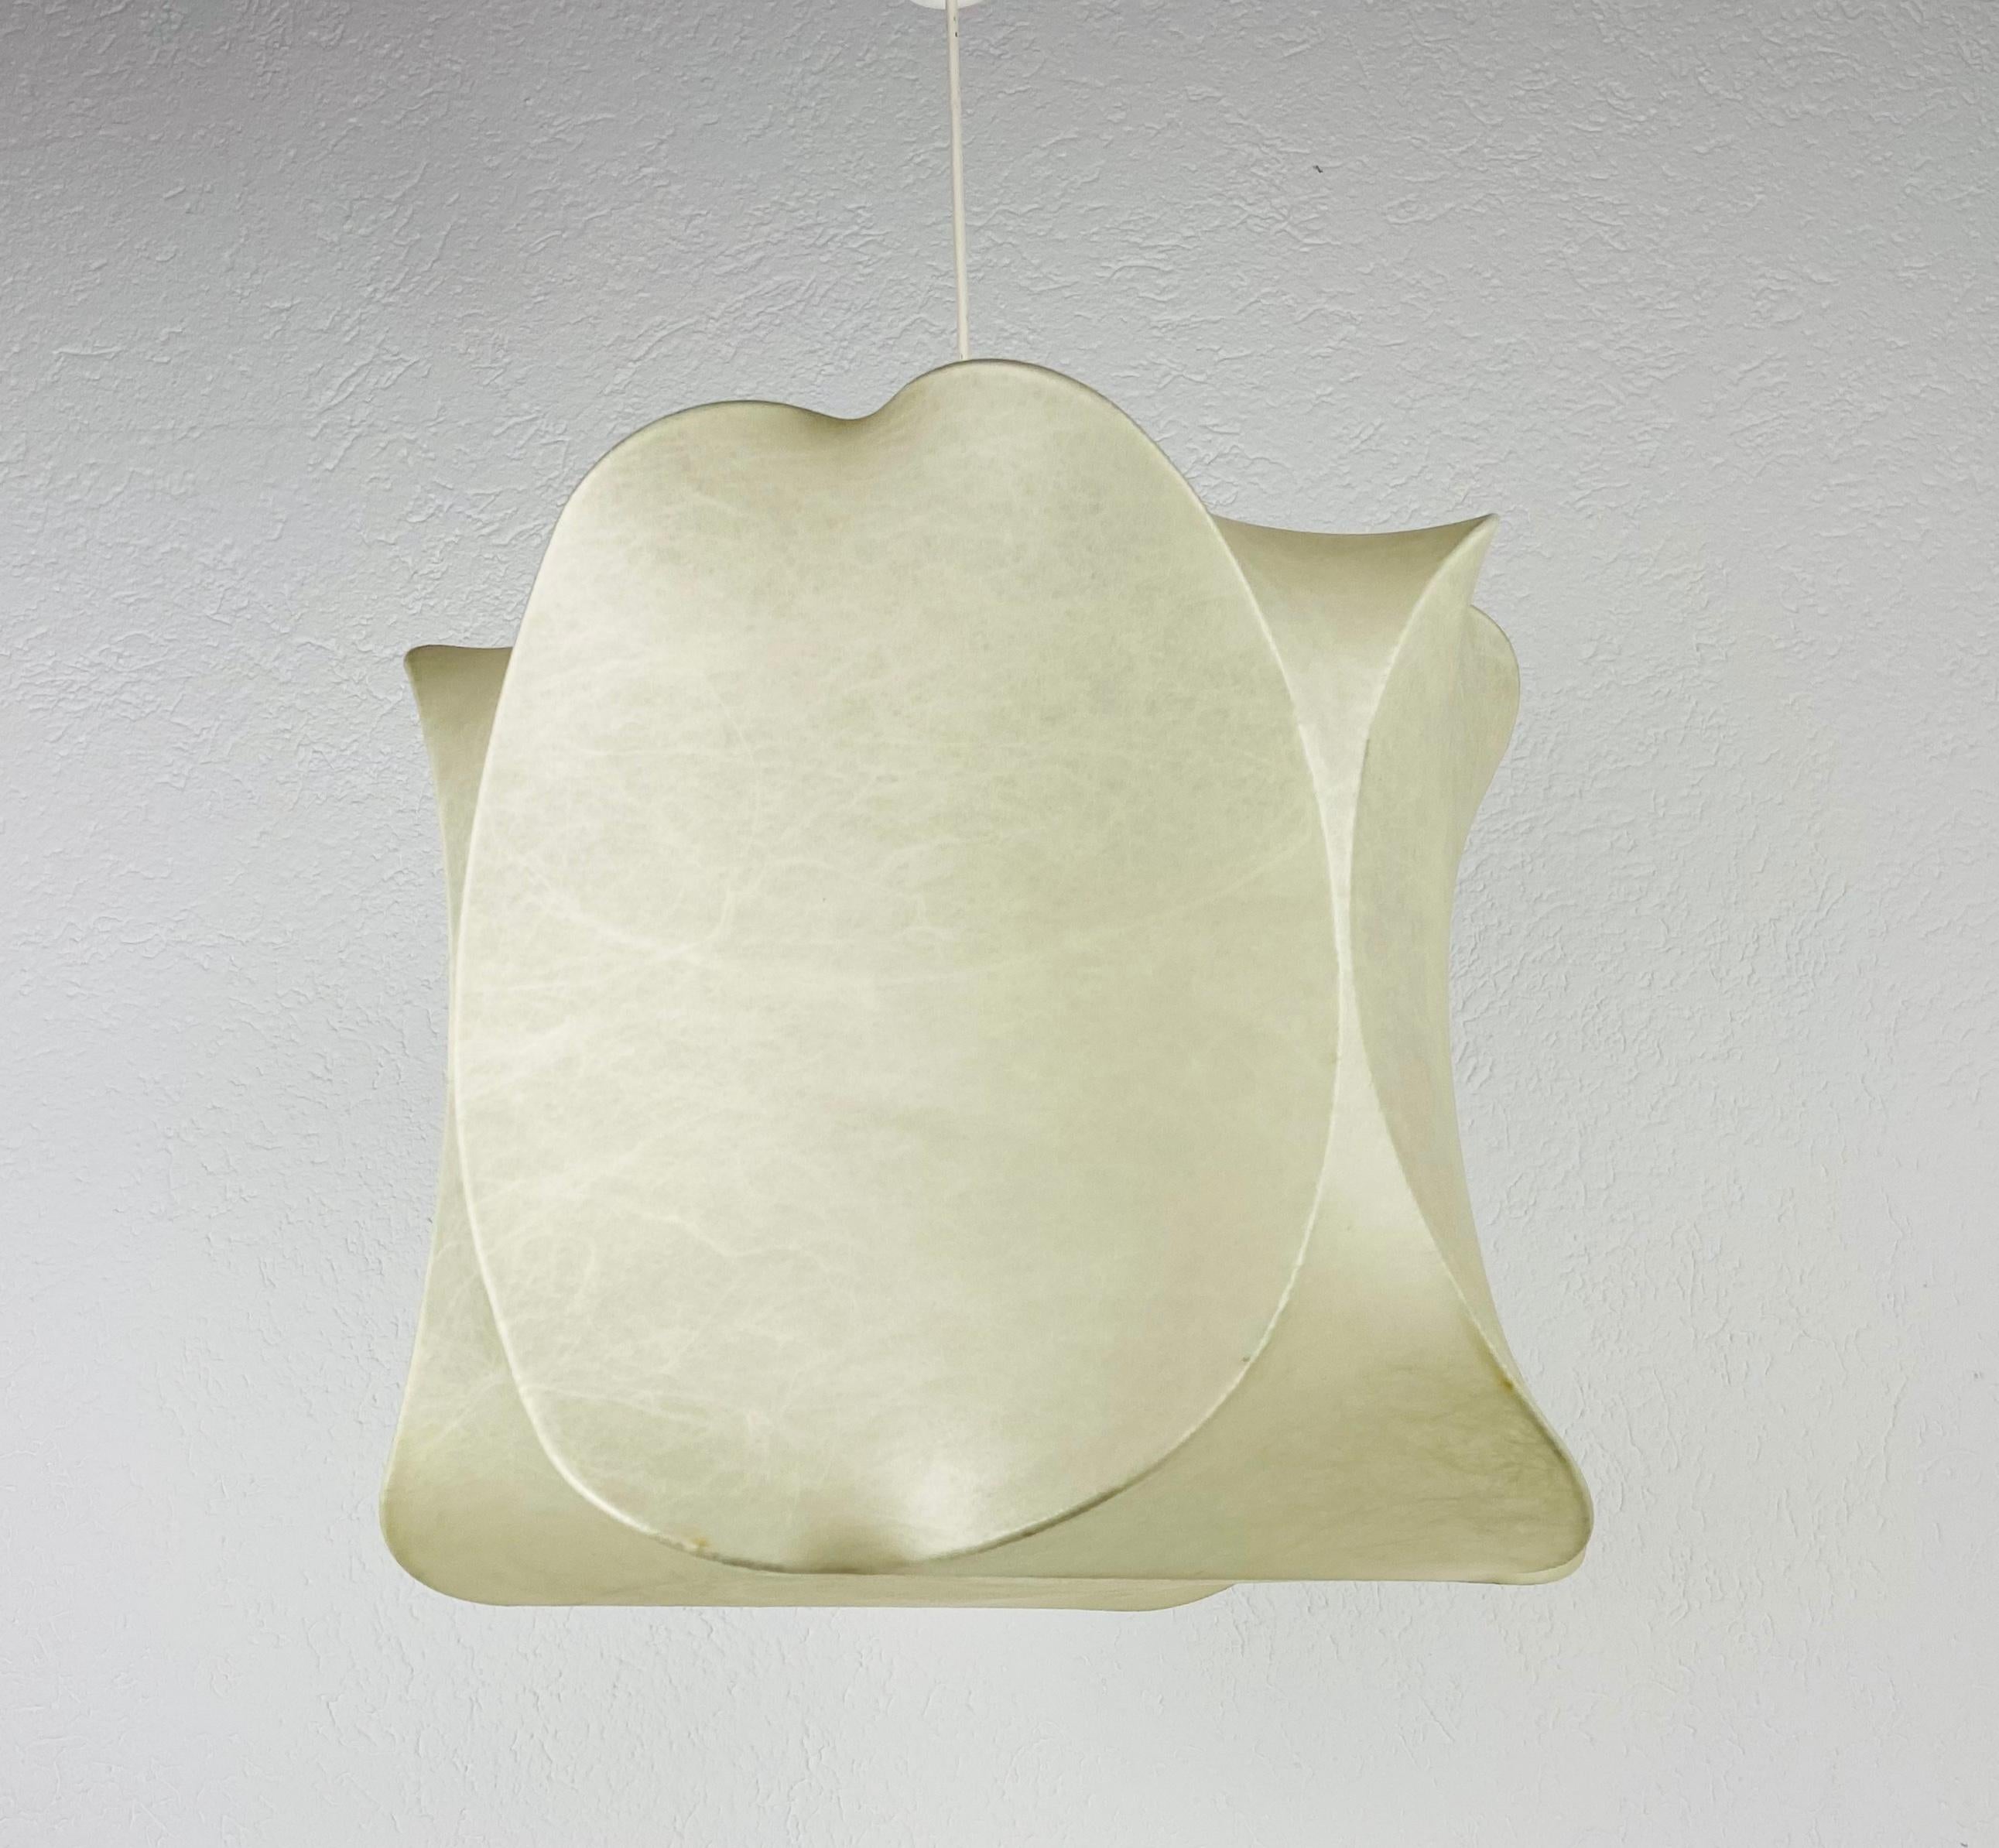 A cocoon pendant lamp made in Italy in the 1960s. The hanging lamp has a design similar to the lightings made by Achille Castiglioni. The lamp shade is made of original resin and has a losange shape.

Maximum height: 38-74 cm

The light requires